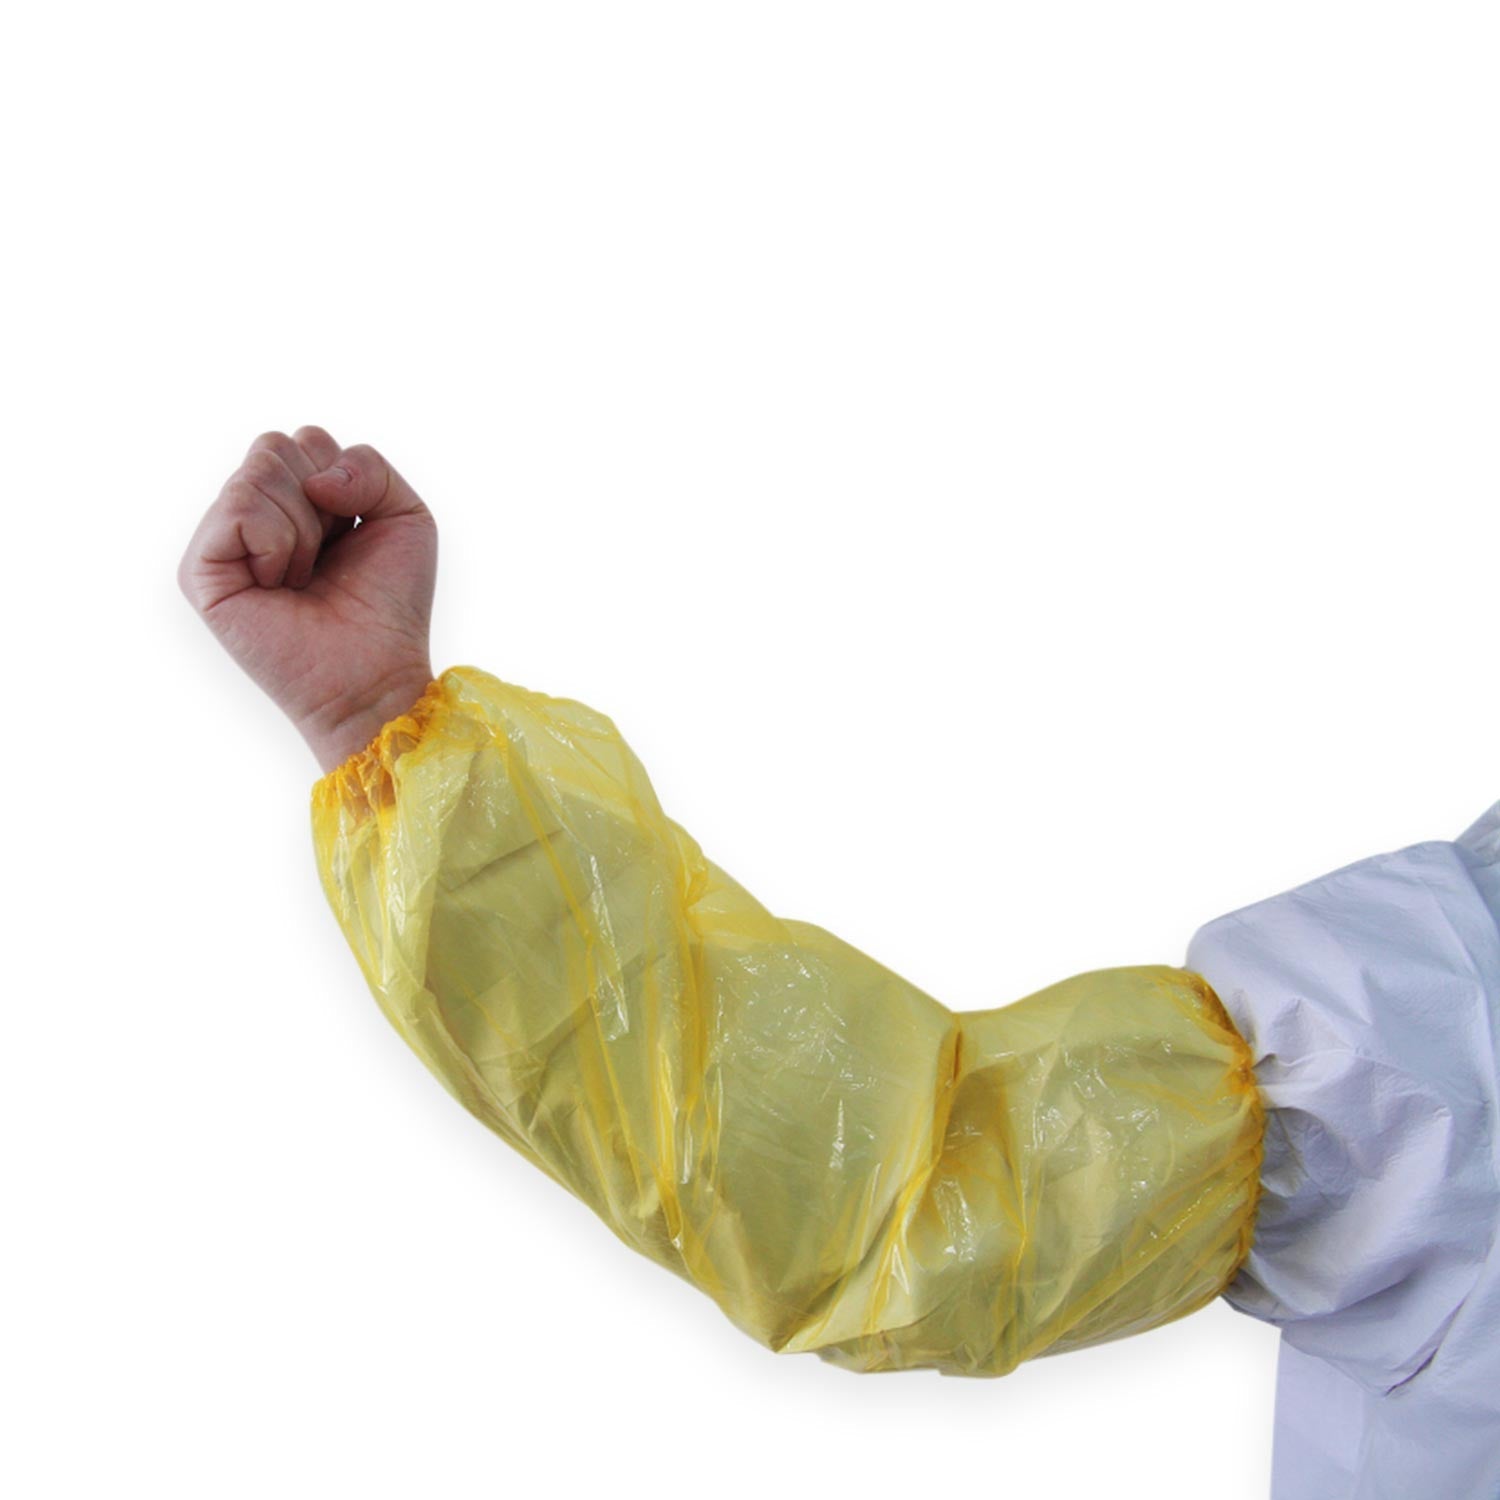 Allcare Allcare Sleeve Protector Low Density PE Hand Made Yellow 18Inc - CT/1000 Safety & PPE Carton of 1000 